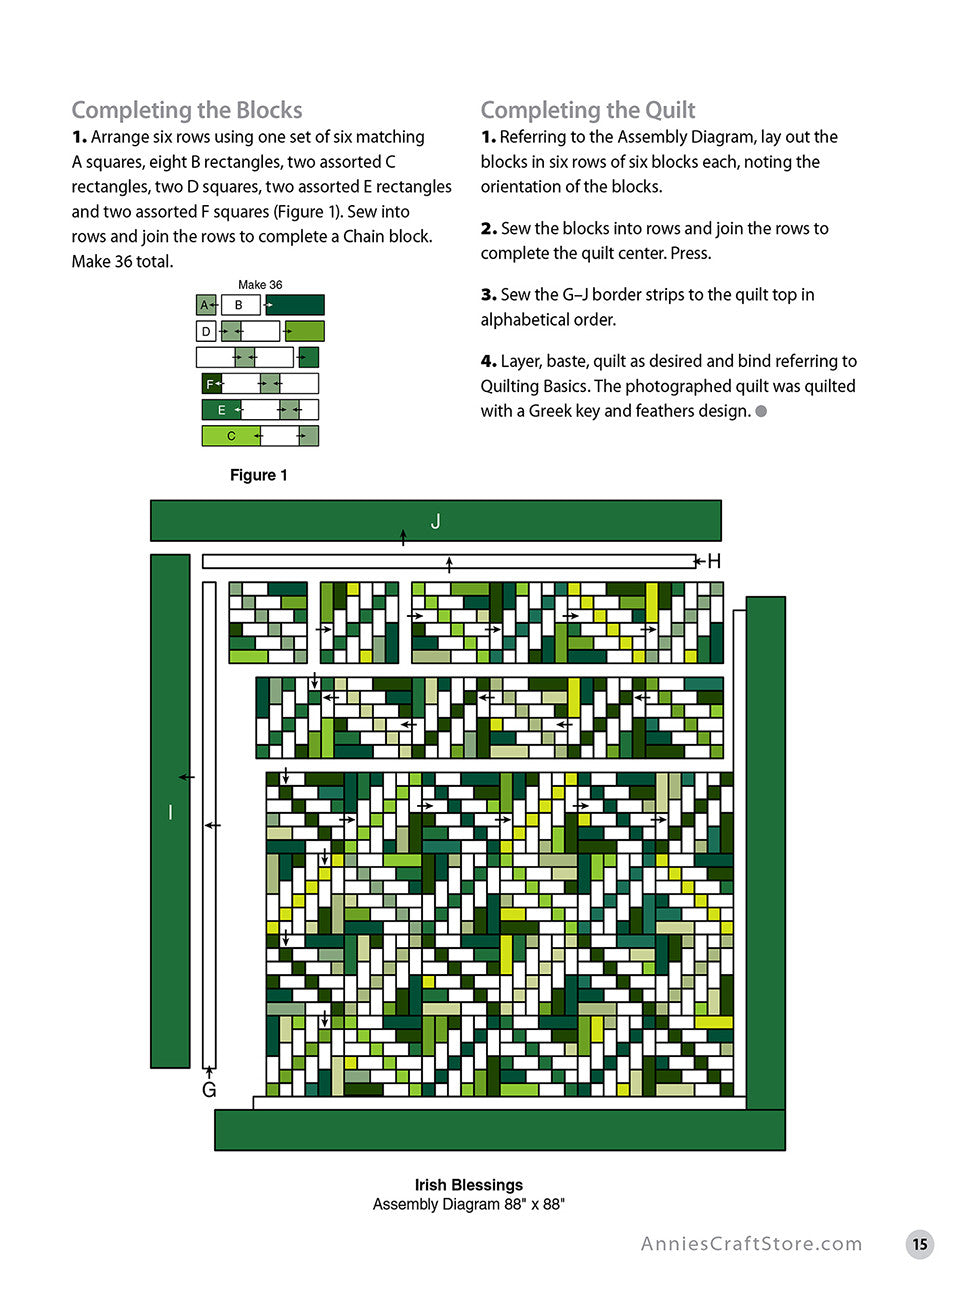 Jelly Roll Quilts for All Seasons Pattern Book by Scott Flanagan for Annie's Quilting